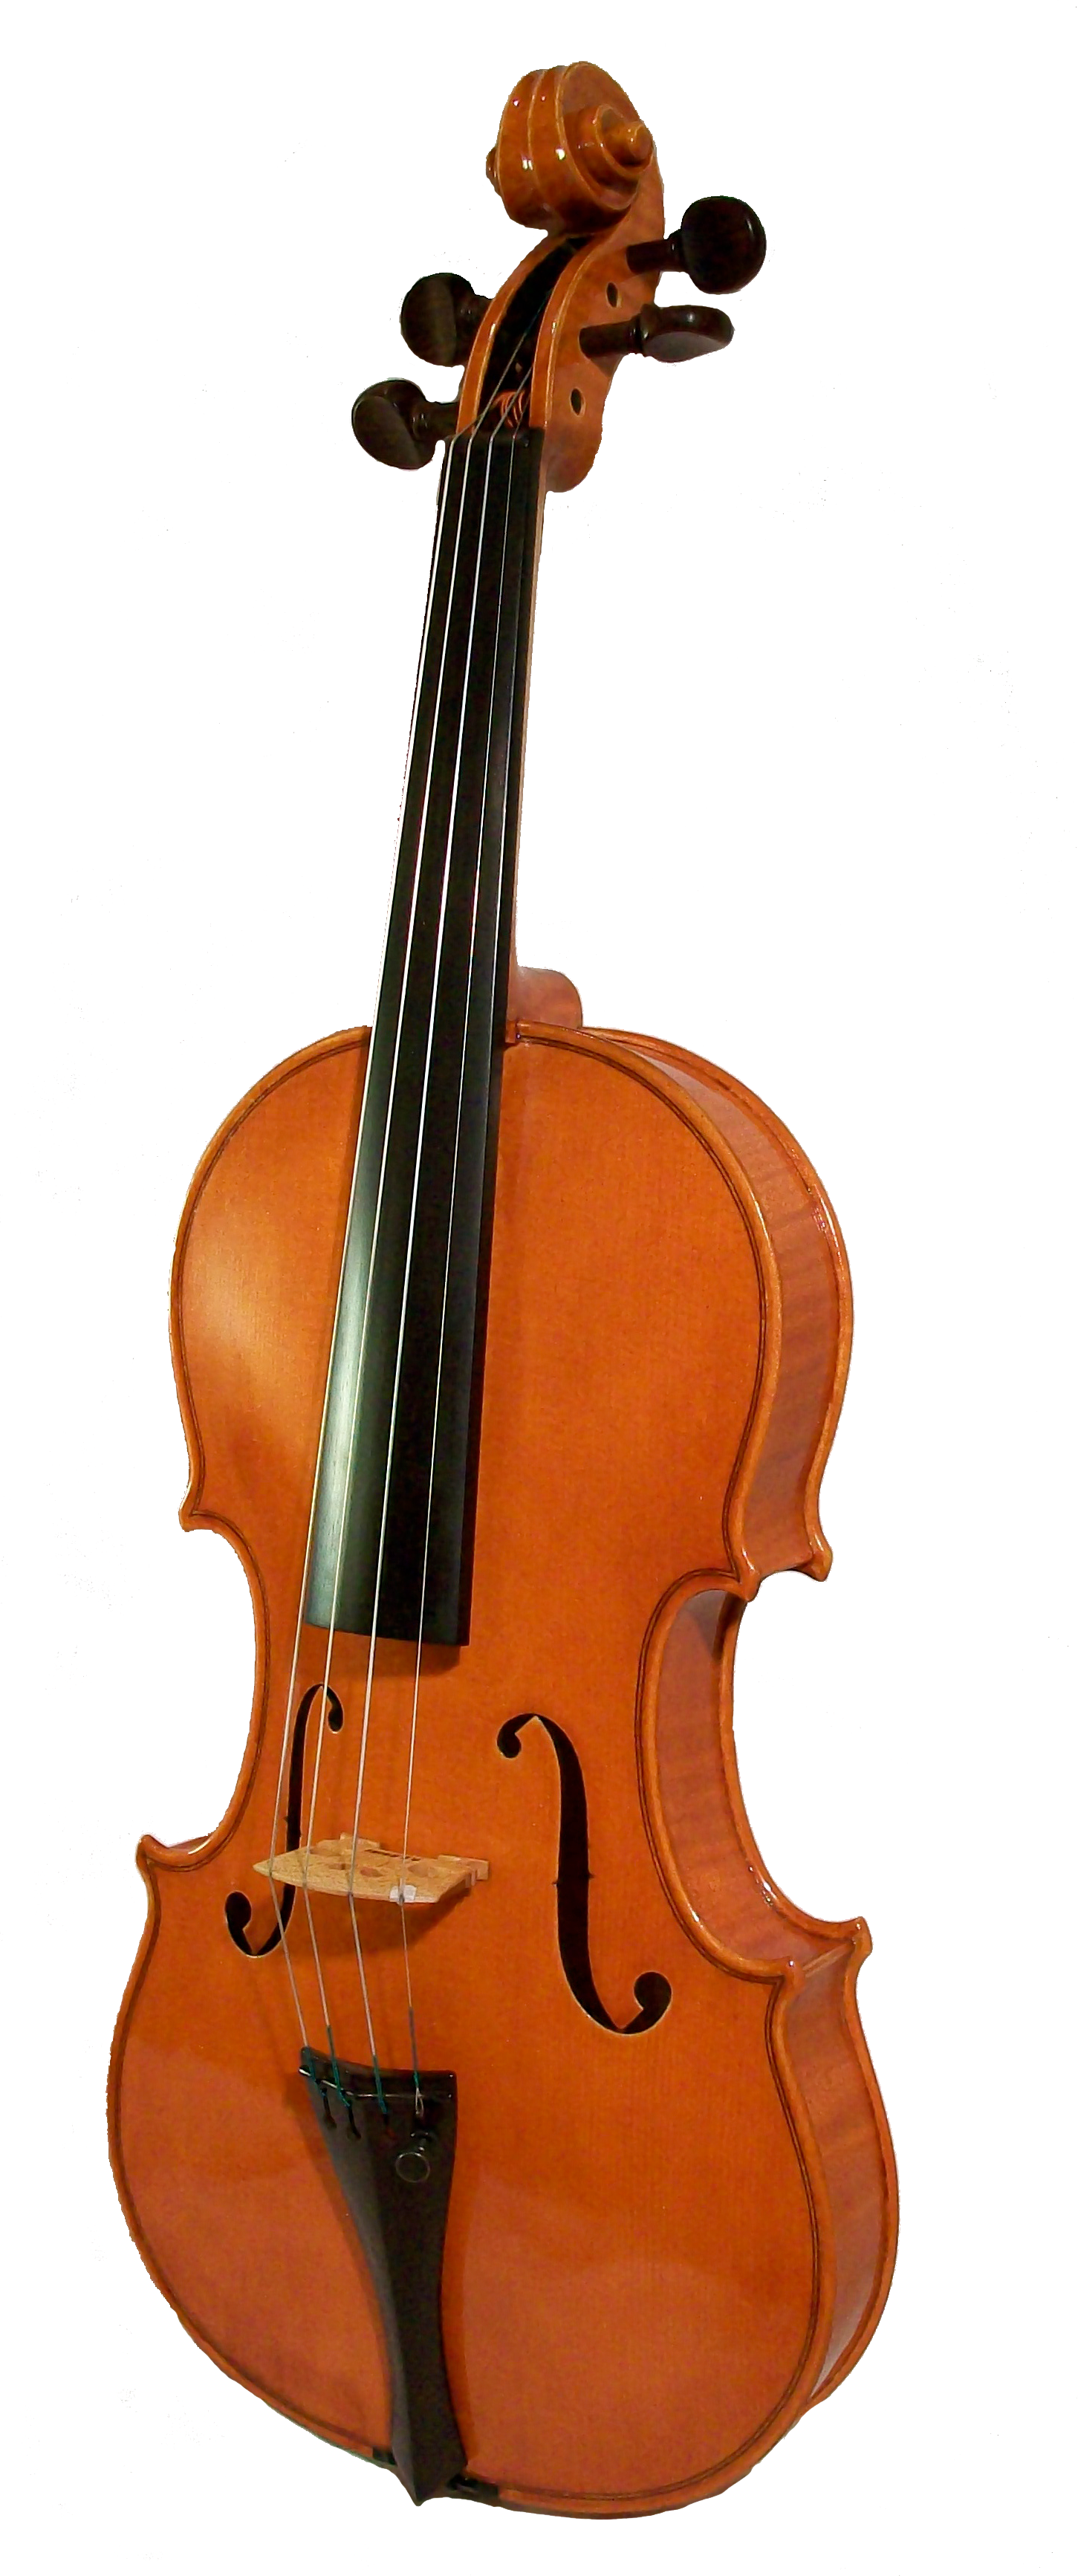 Classic Violin Isolatedon Blue Background.png